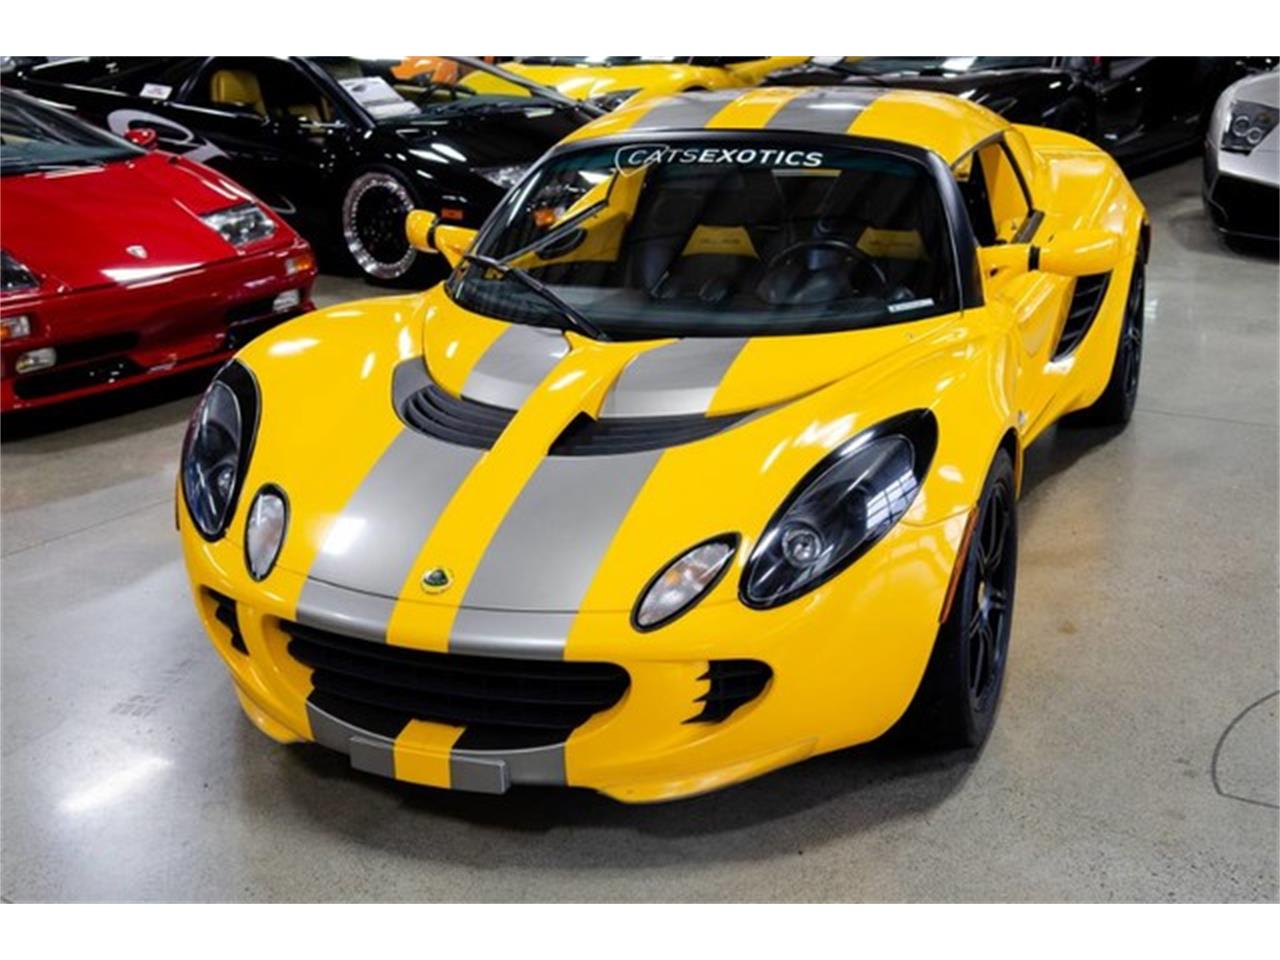 2006 Lotus Elise For Sale In Seattle Wa Classiccarsbay Com